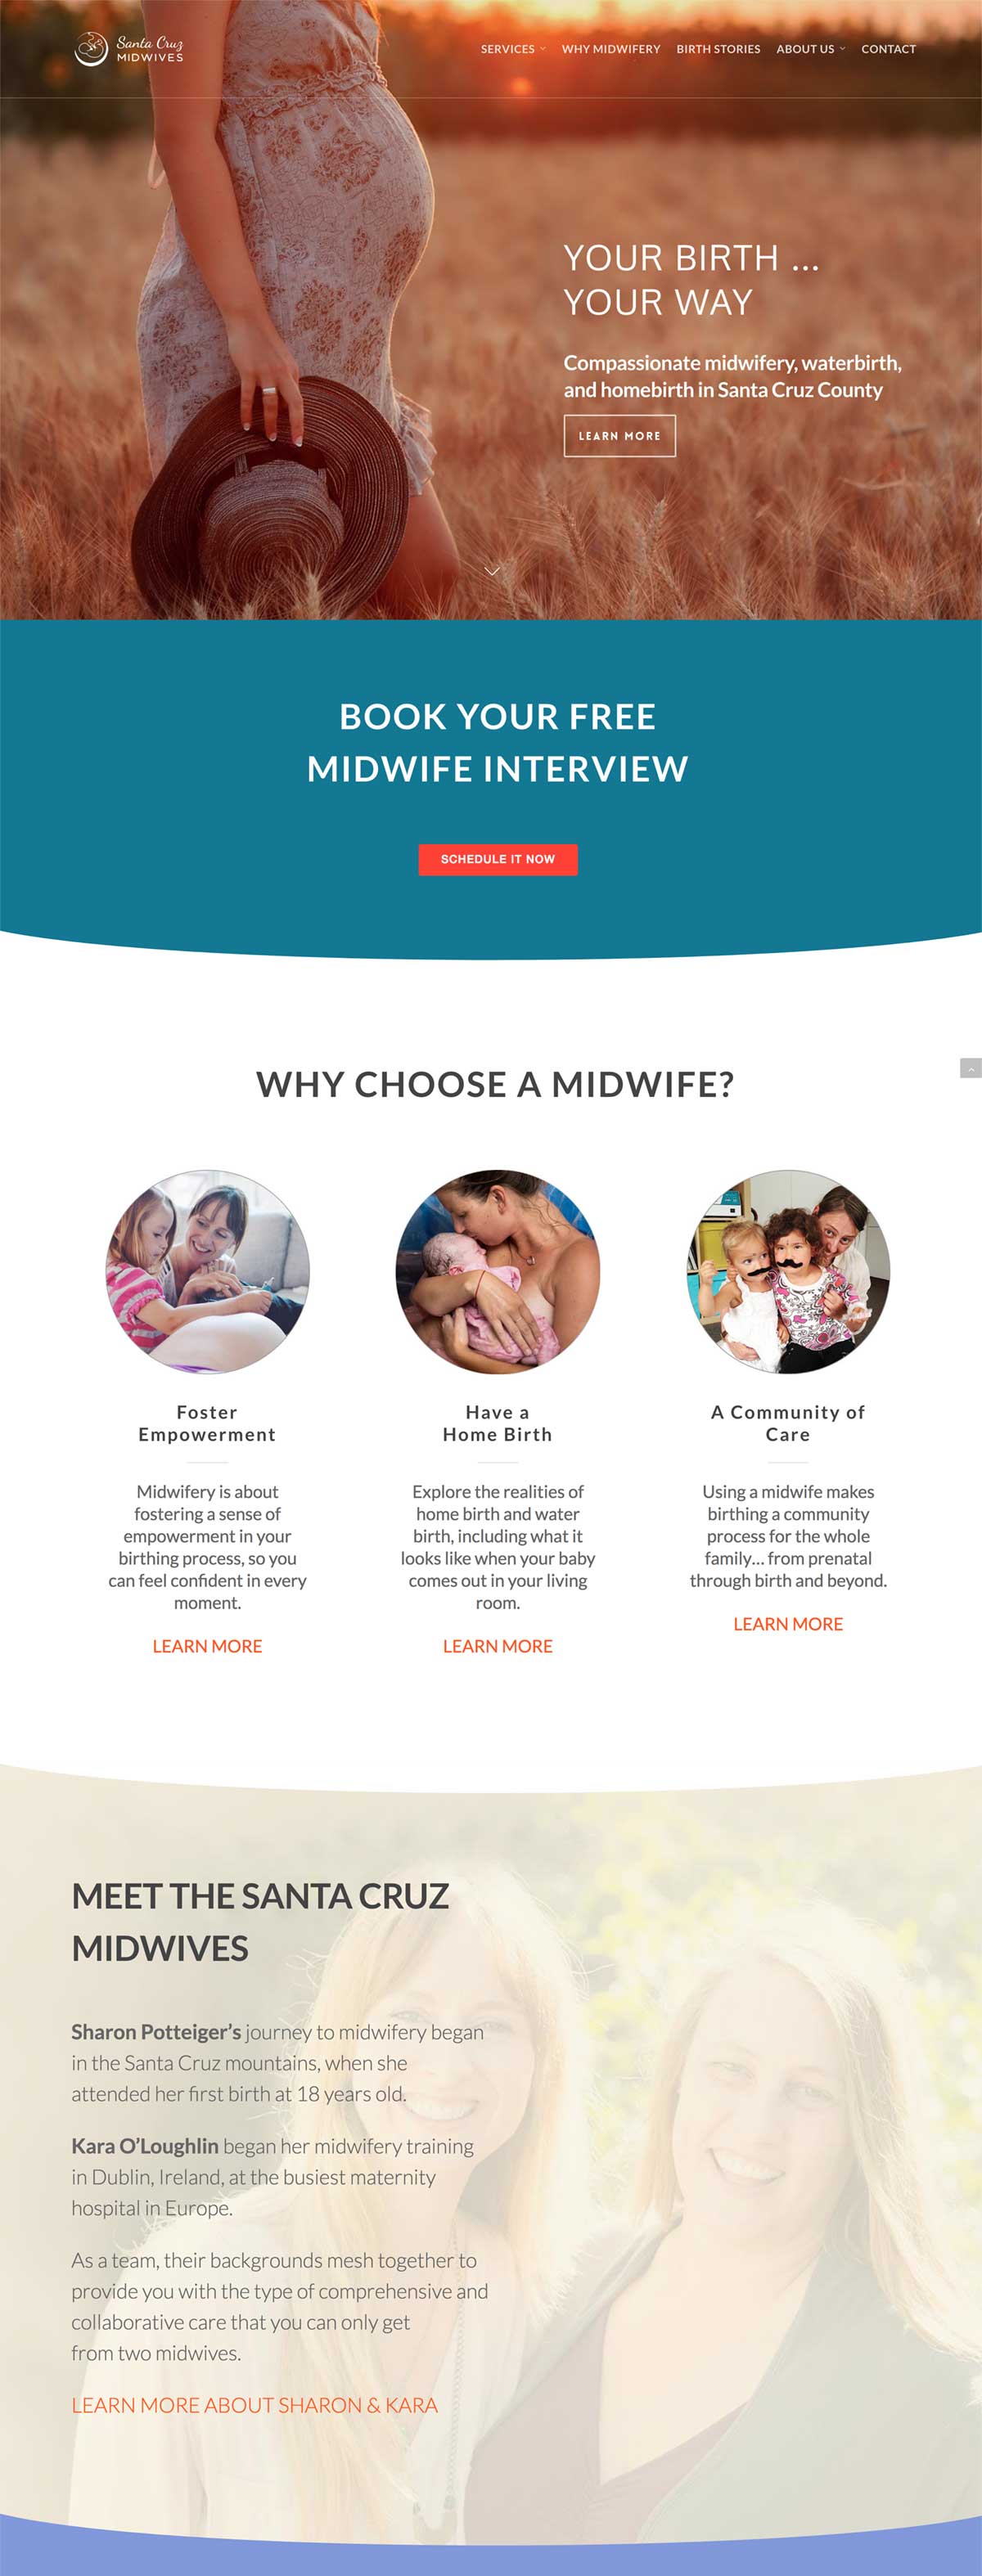 Web design services in Santa Cruz for Midwives and other health professionals